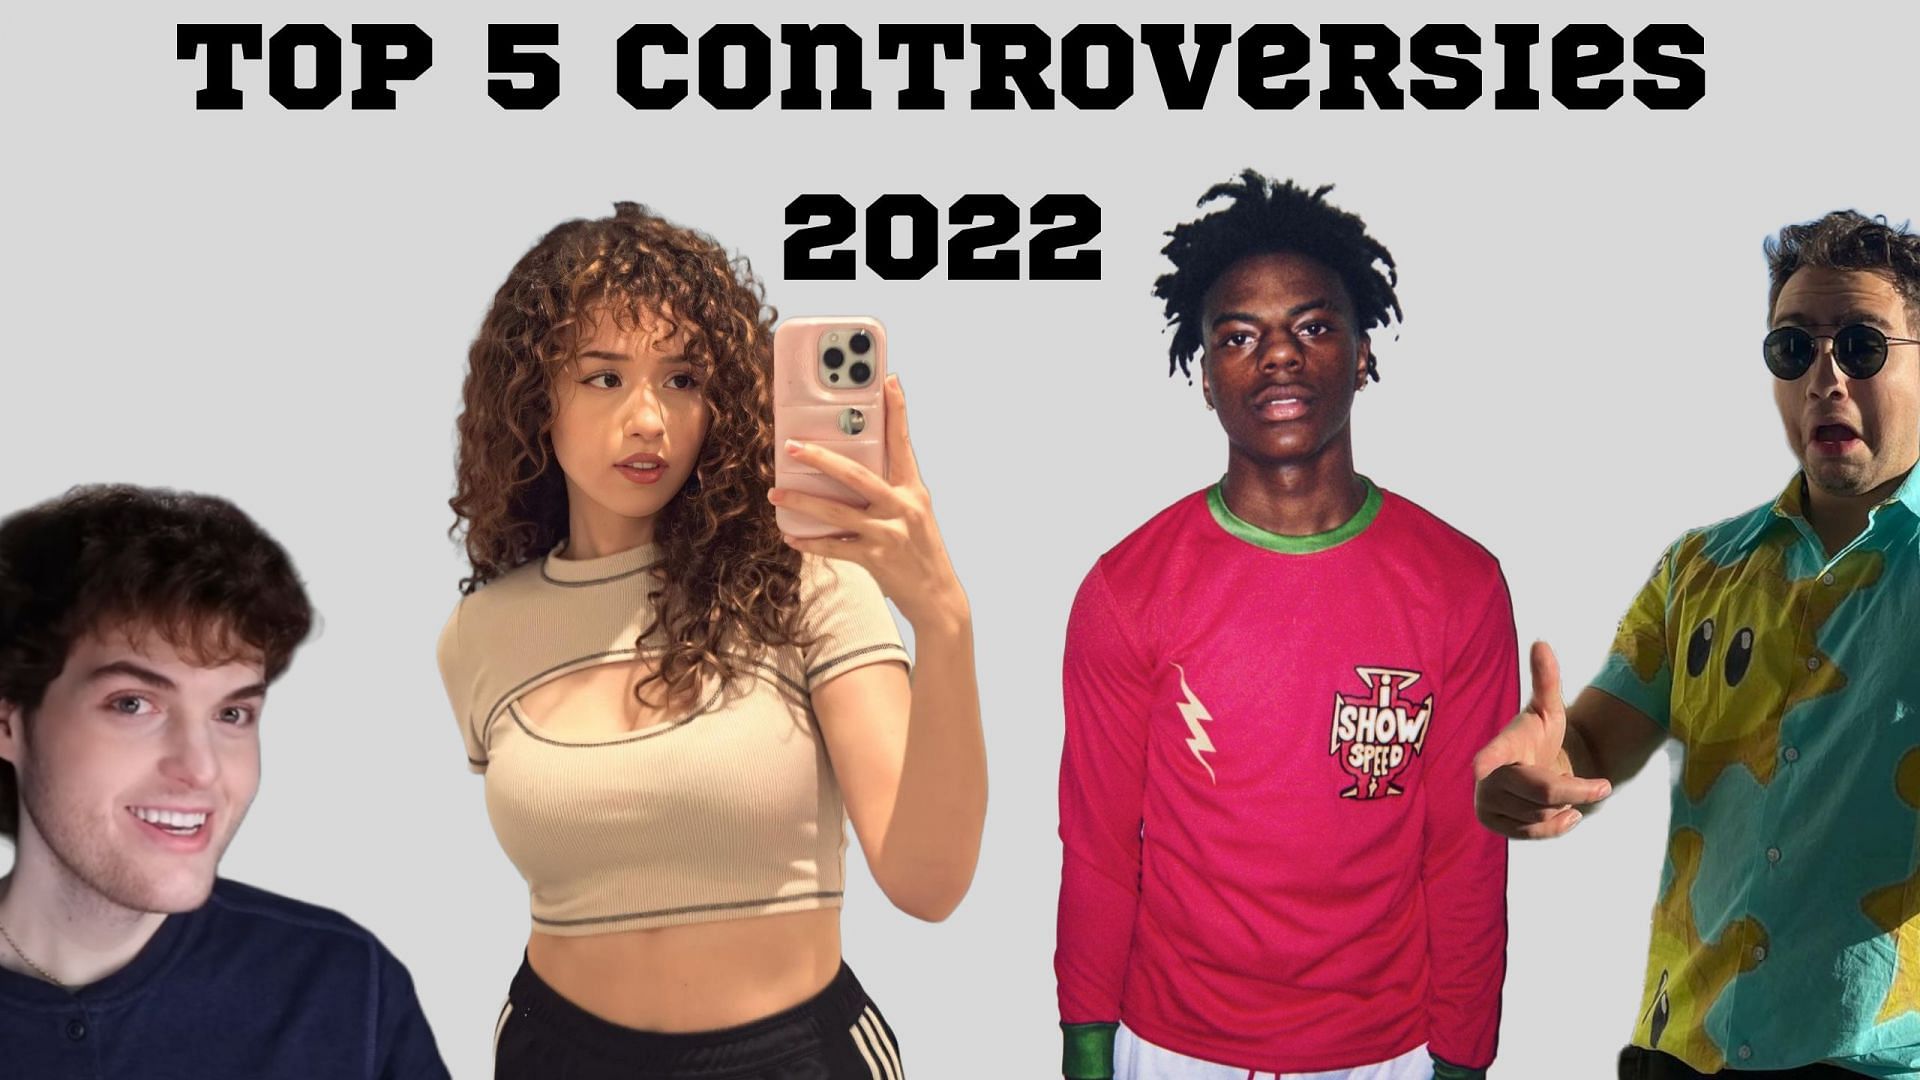 The 5 biggest streamer controversies of 2022